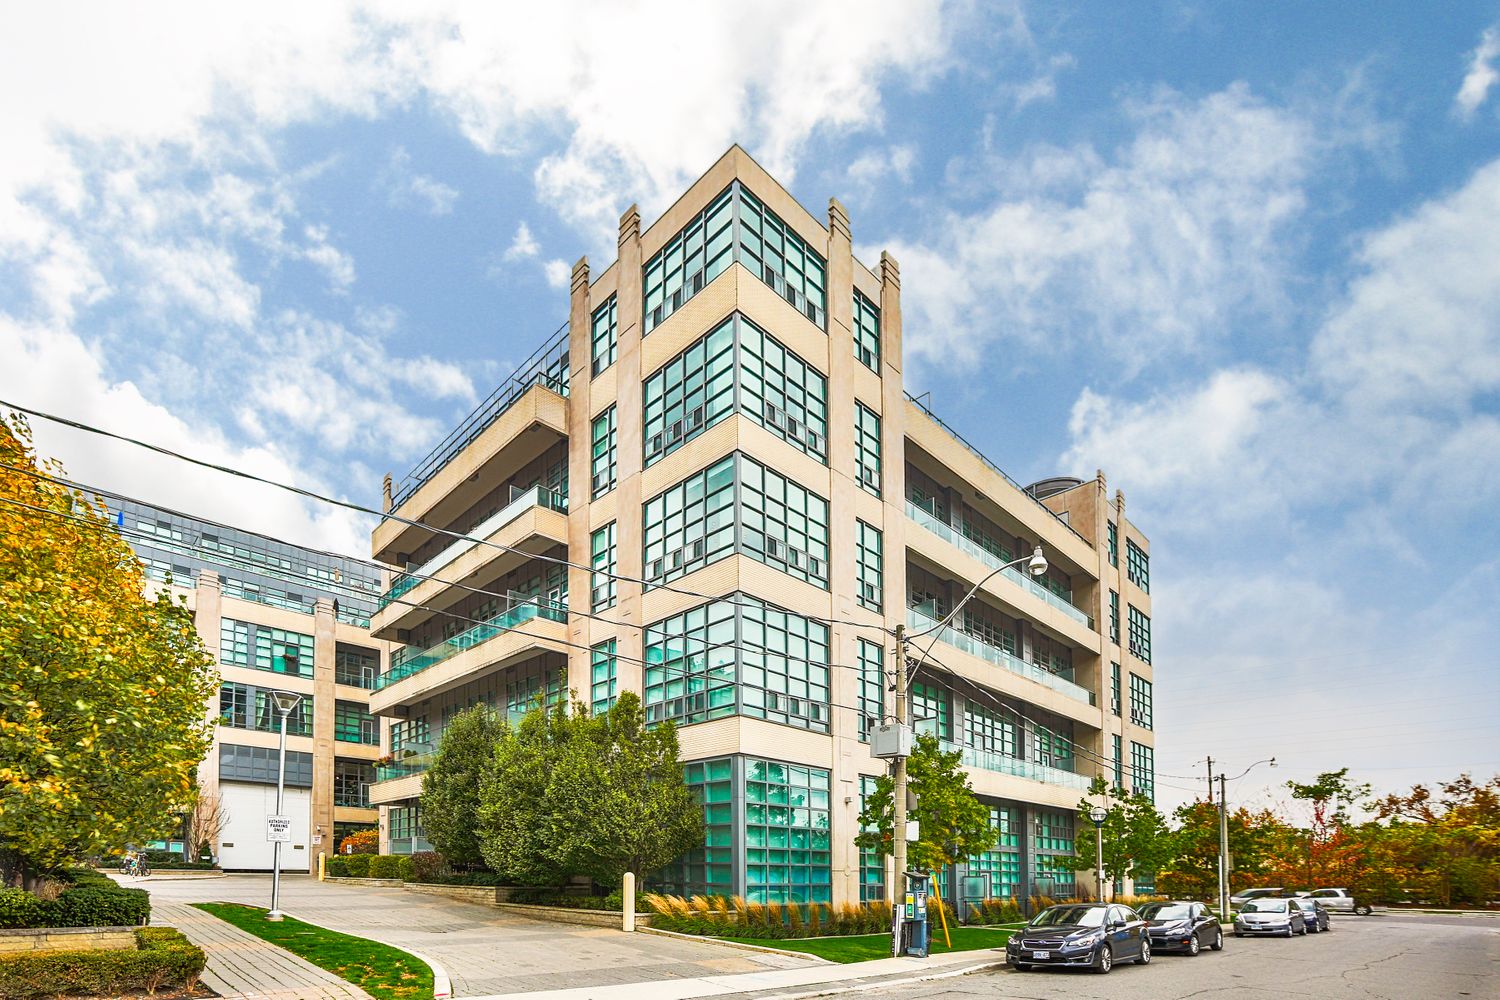 380 Macpherson Avenue. Madison Avenue Lofts is located in  Midtown, Toronto - image #2 of 5